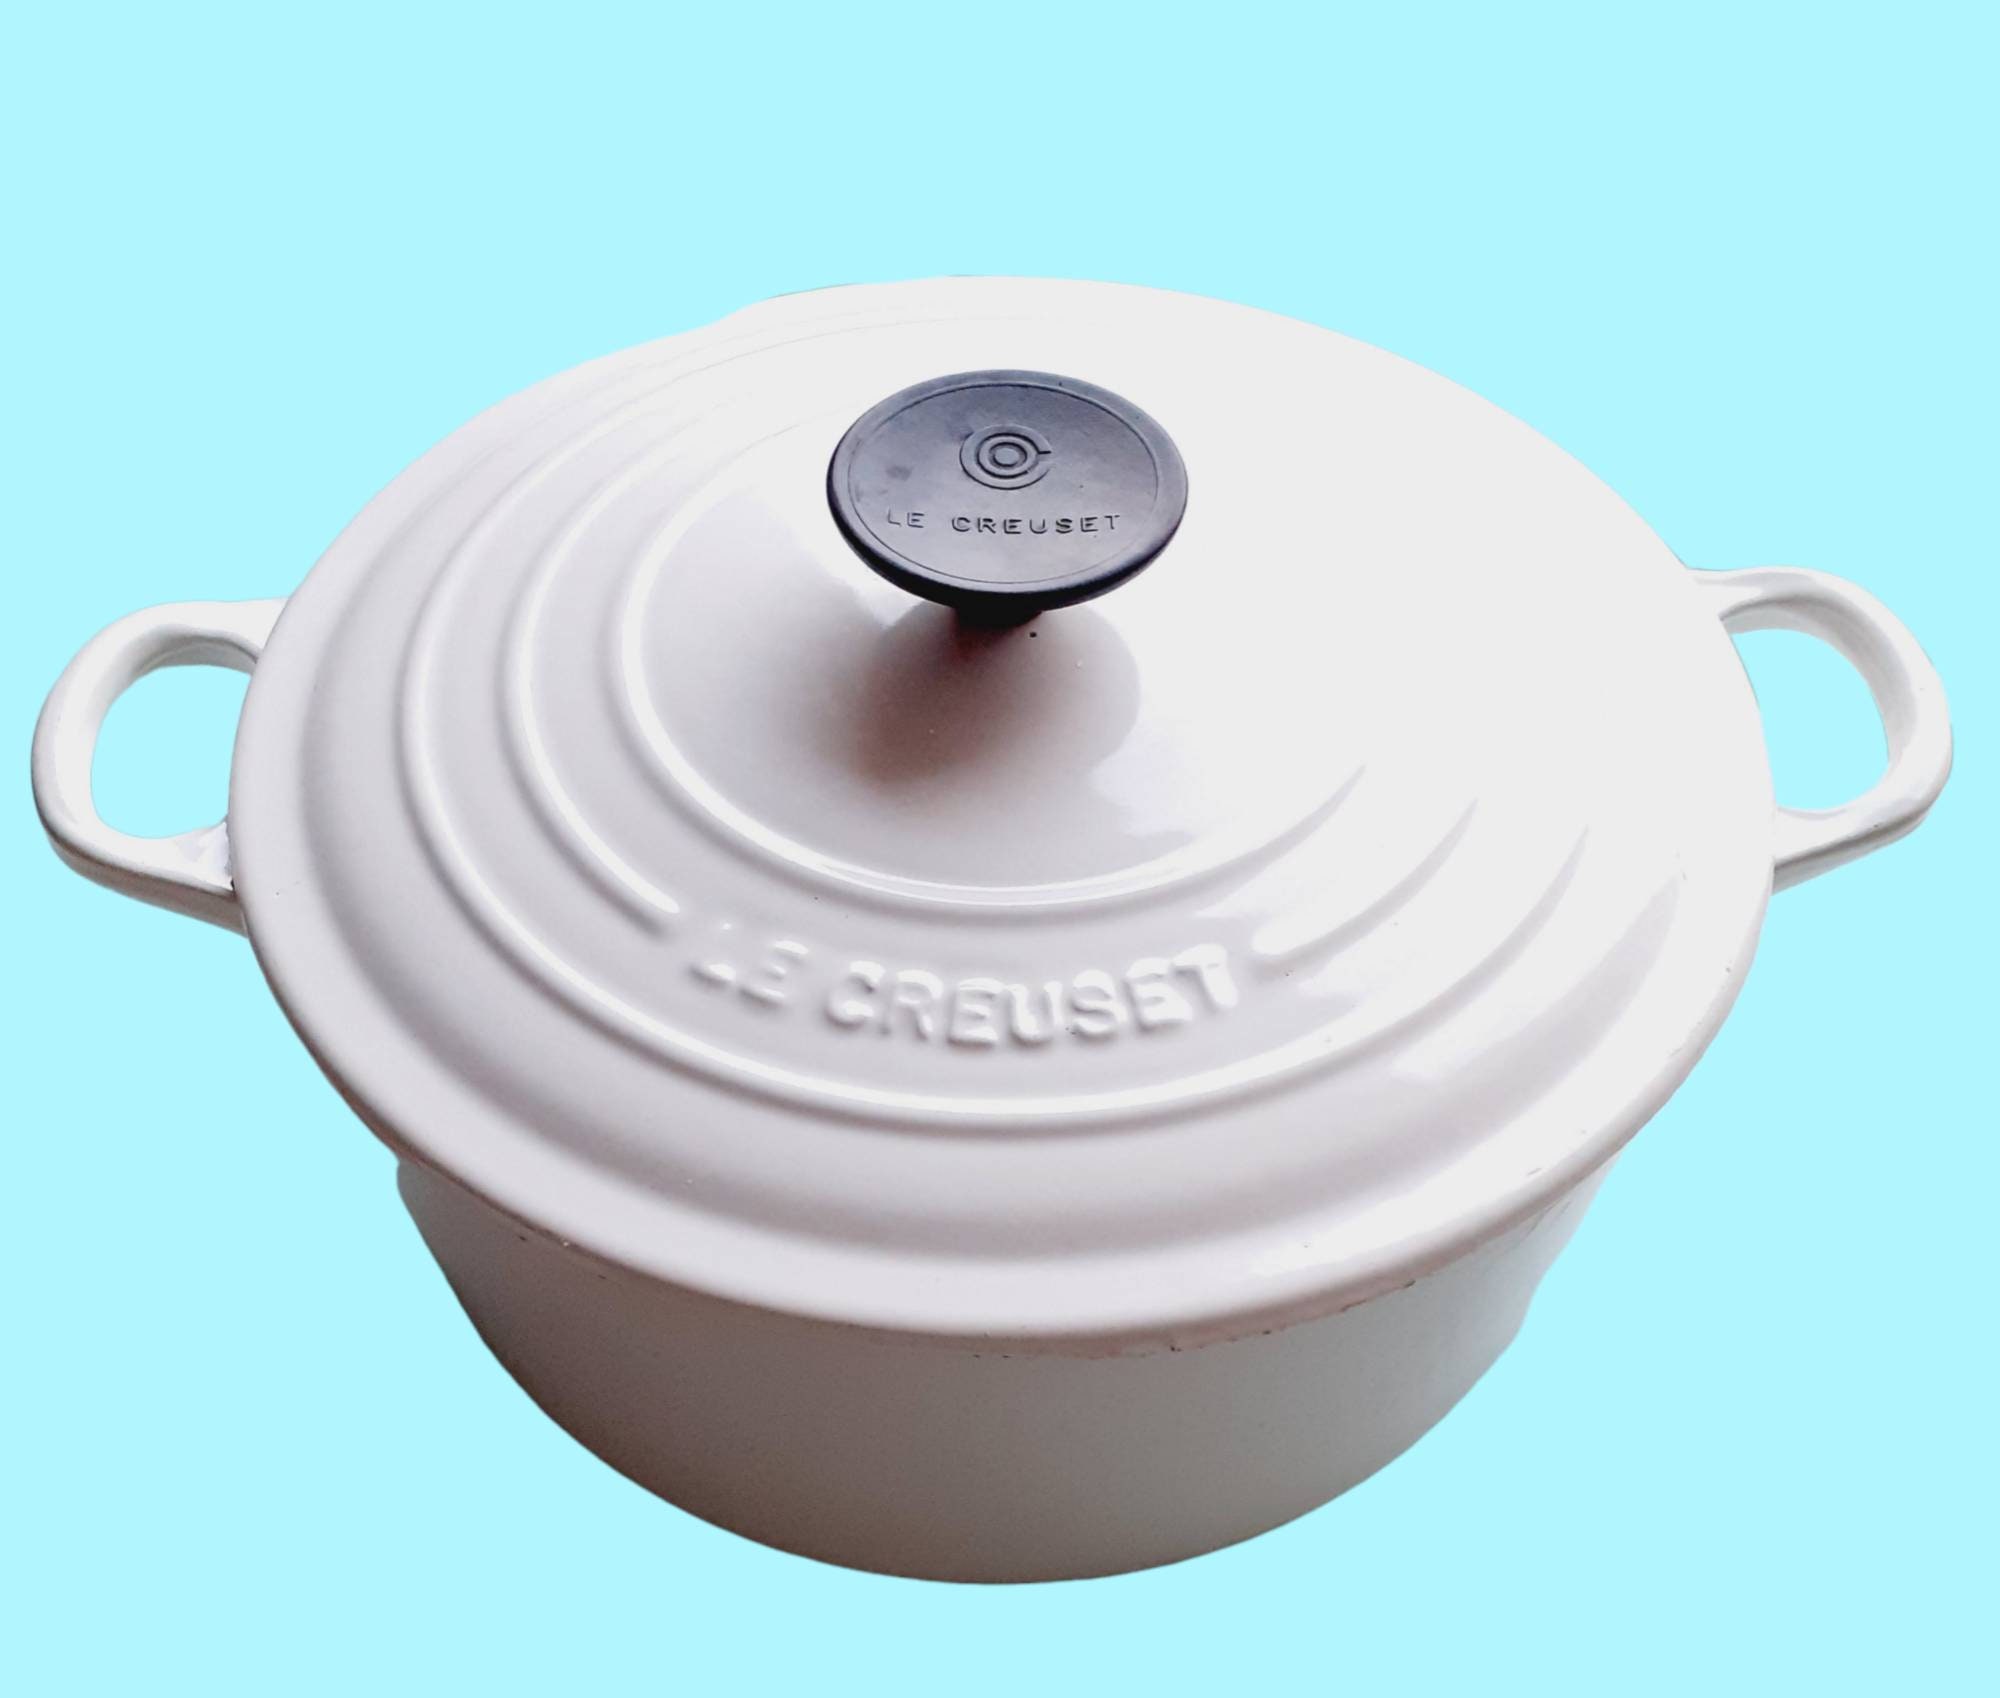 Le Creuset WHITE Mini #14 Cast Iron Cocotte Dutch Oven Made in France ~~NO  LID~~